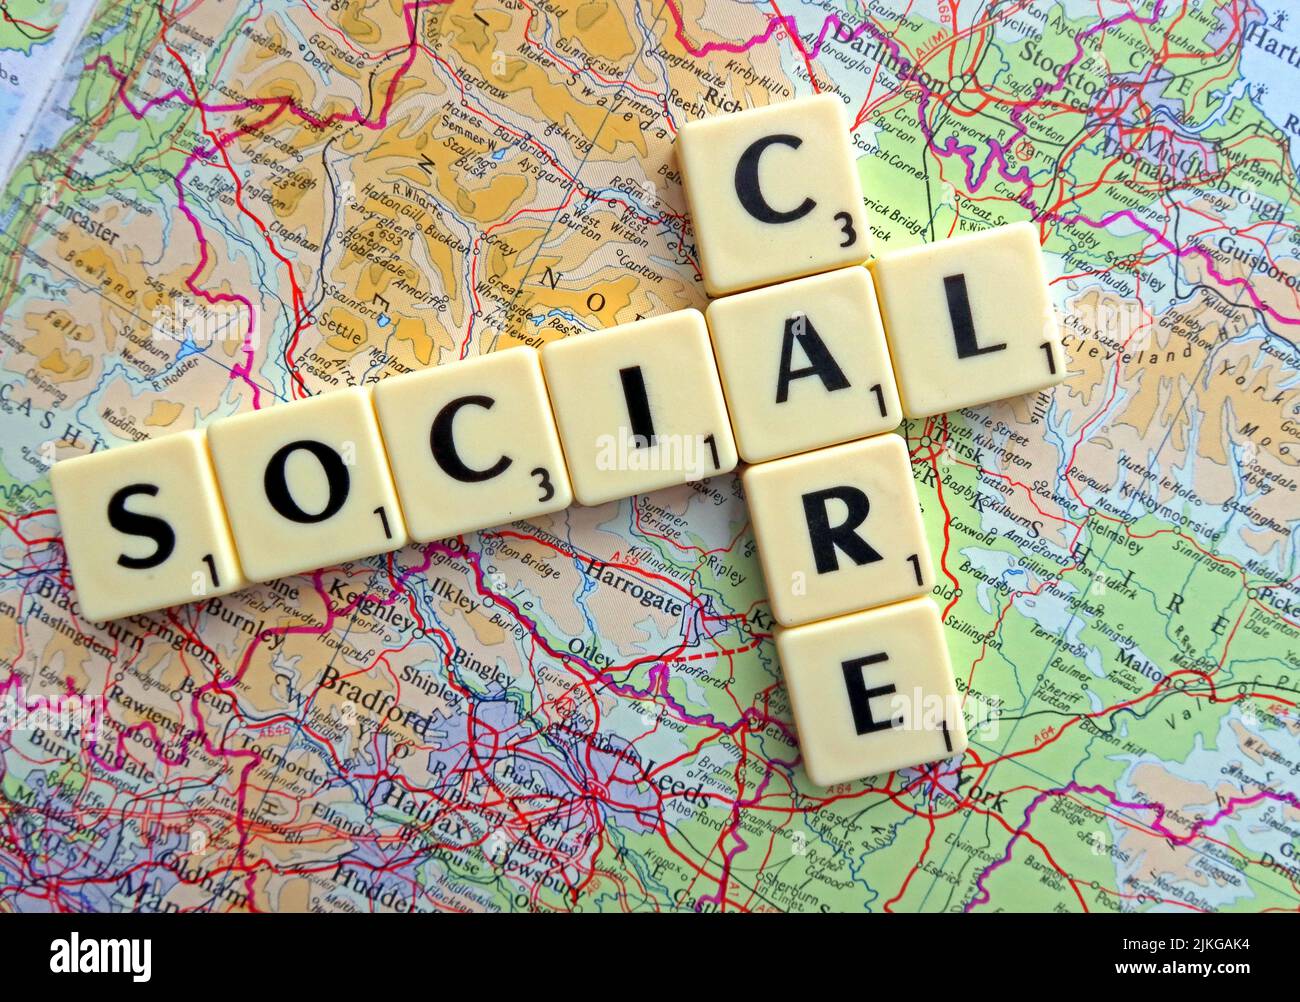 Social Care spelled out in Scrabble letters on a map of England Stock Photo